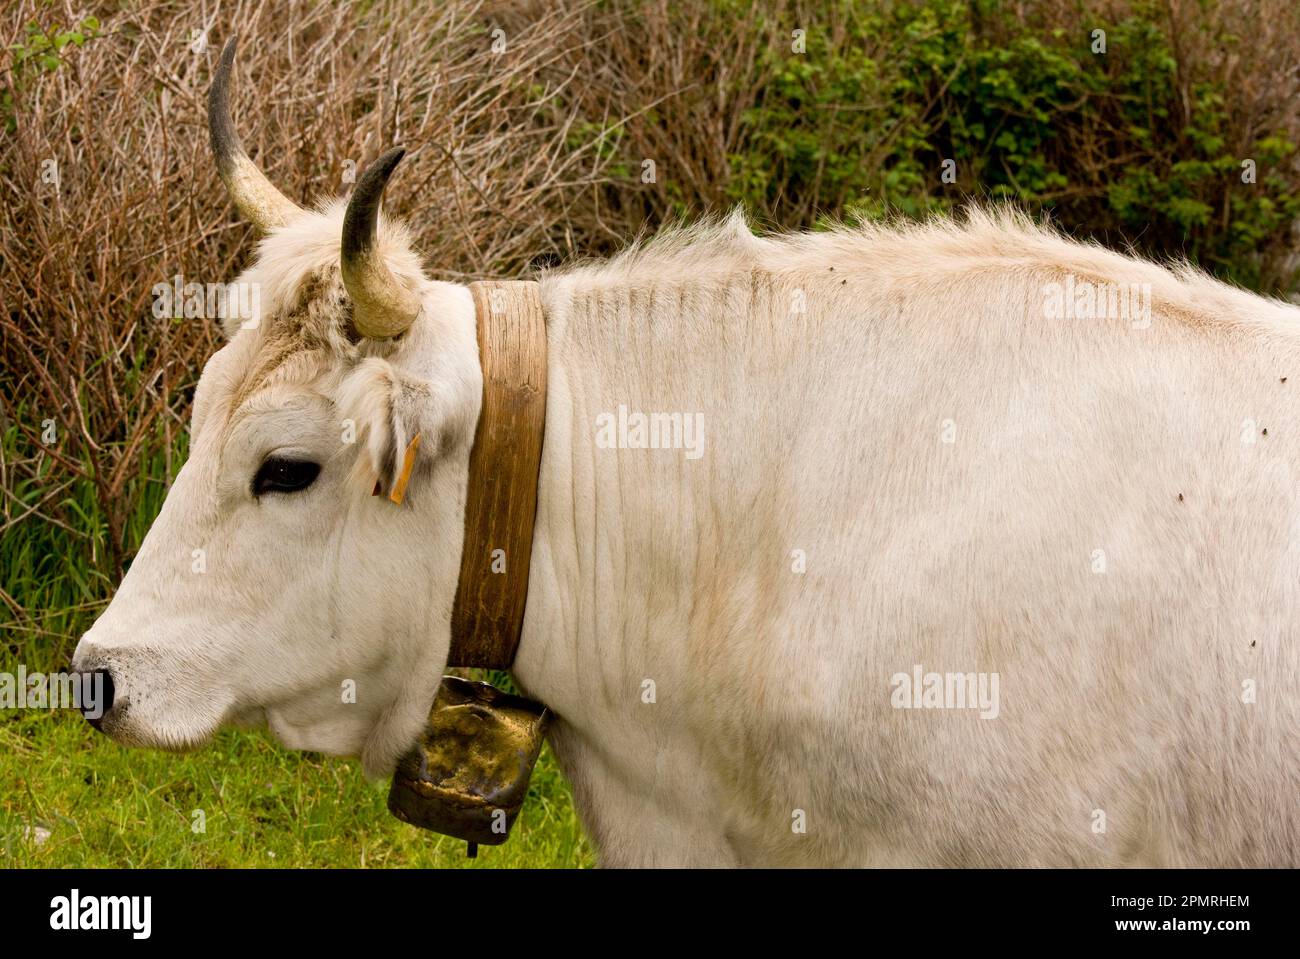 Domestic cattle, Podolica cattle, close-up of head with bell, grazing on walled pasture, Gargano peninsula, Apulia, Italy Stock Photo